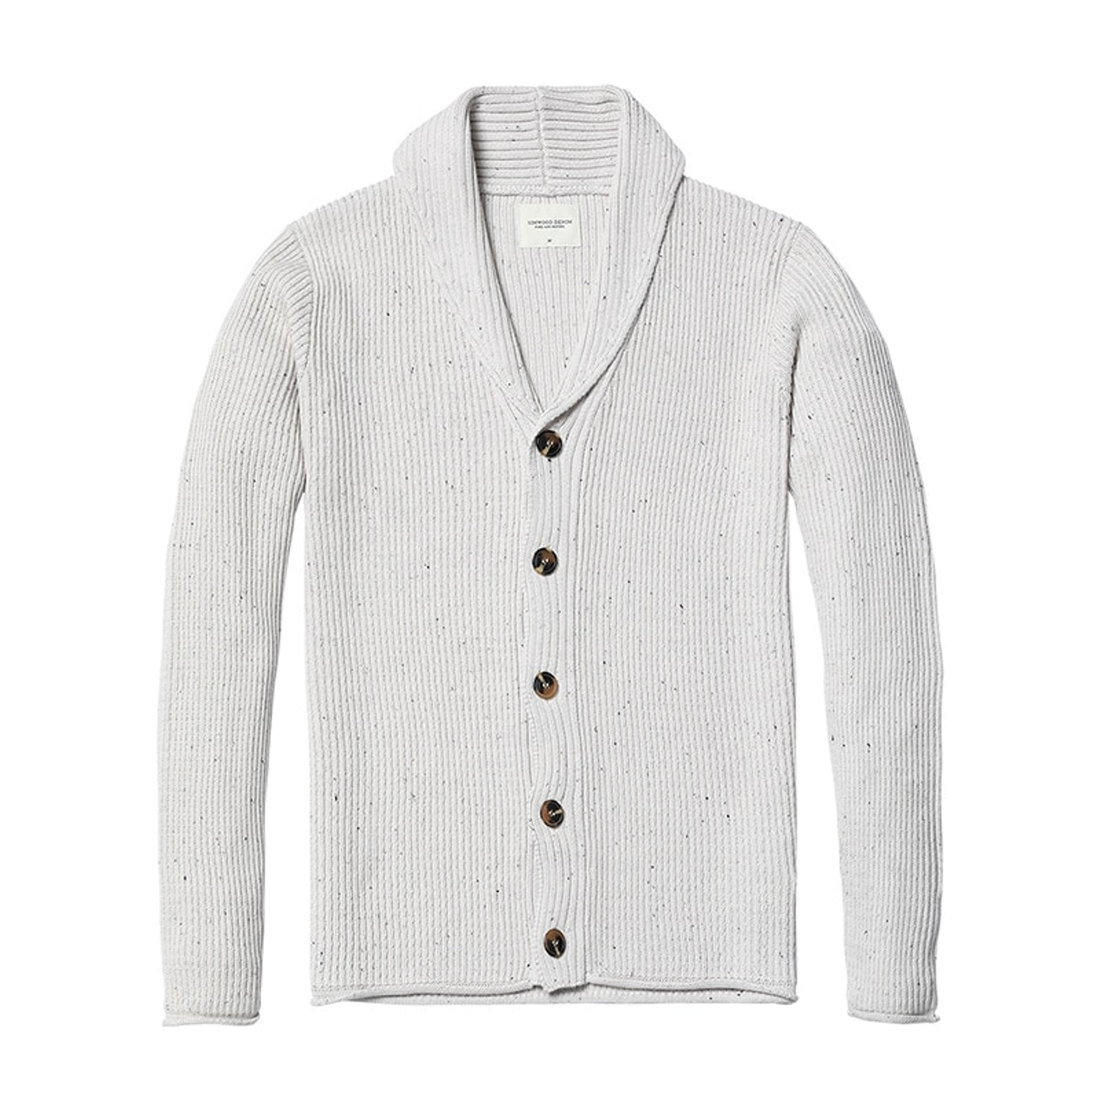 Men's Autumn/Winter Casual Slim Knitted Cardigan